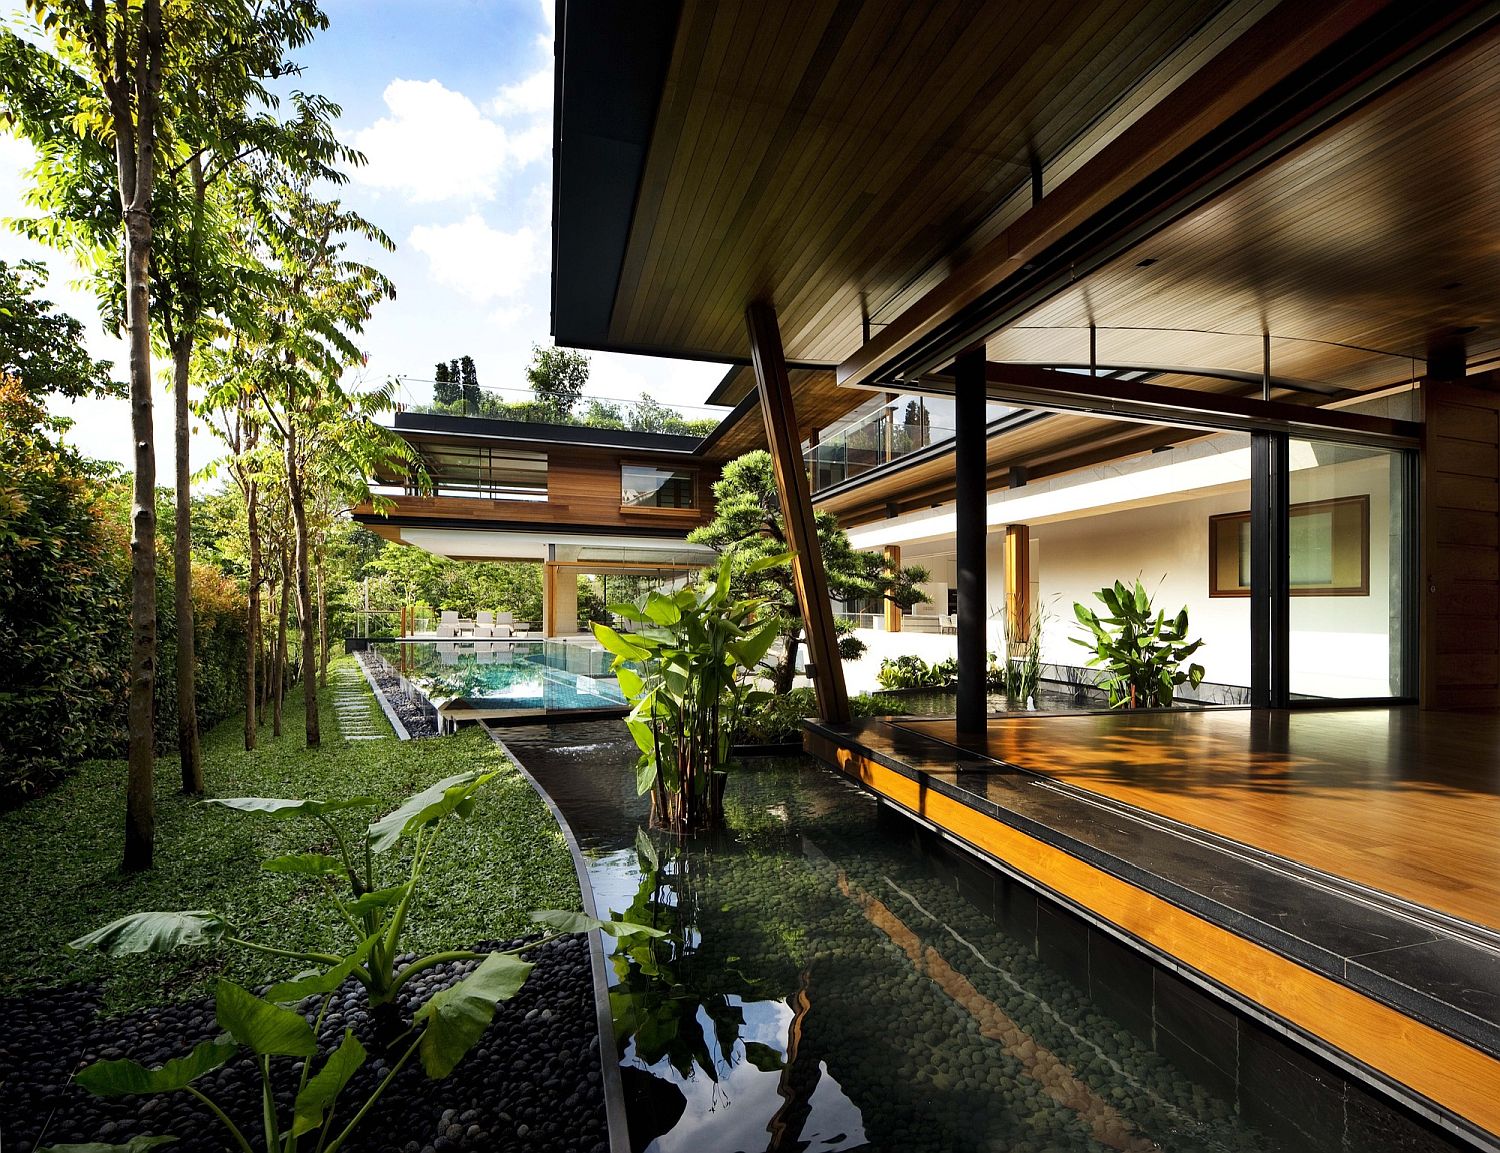 Water-and-greenery-around-the-house-turns-it-into-a-awesome-oasis